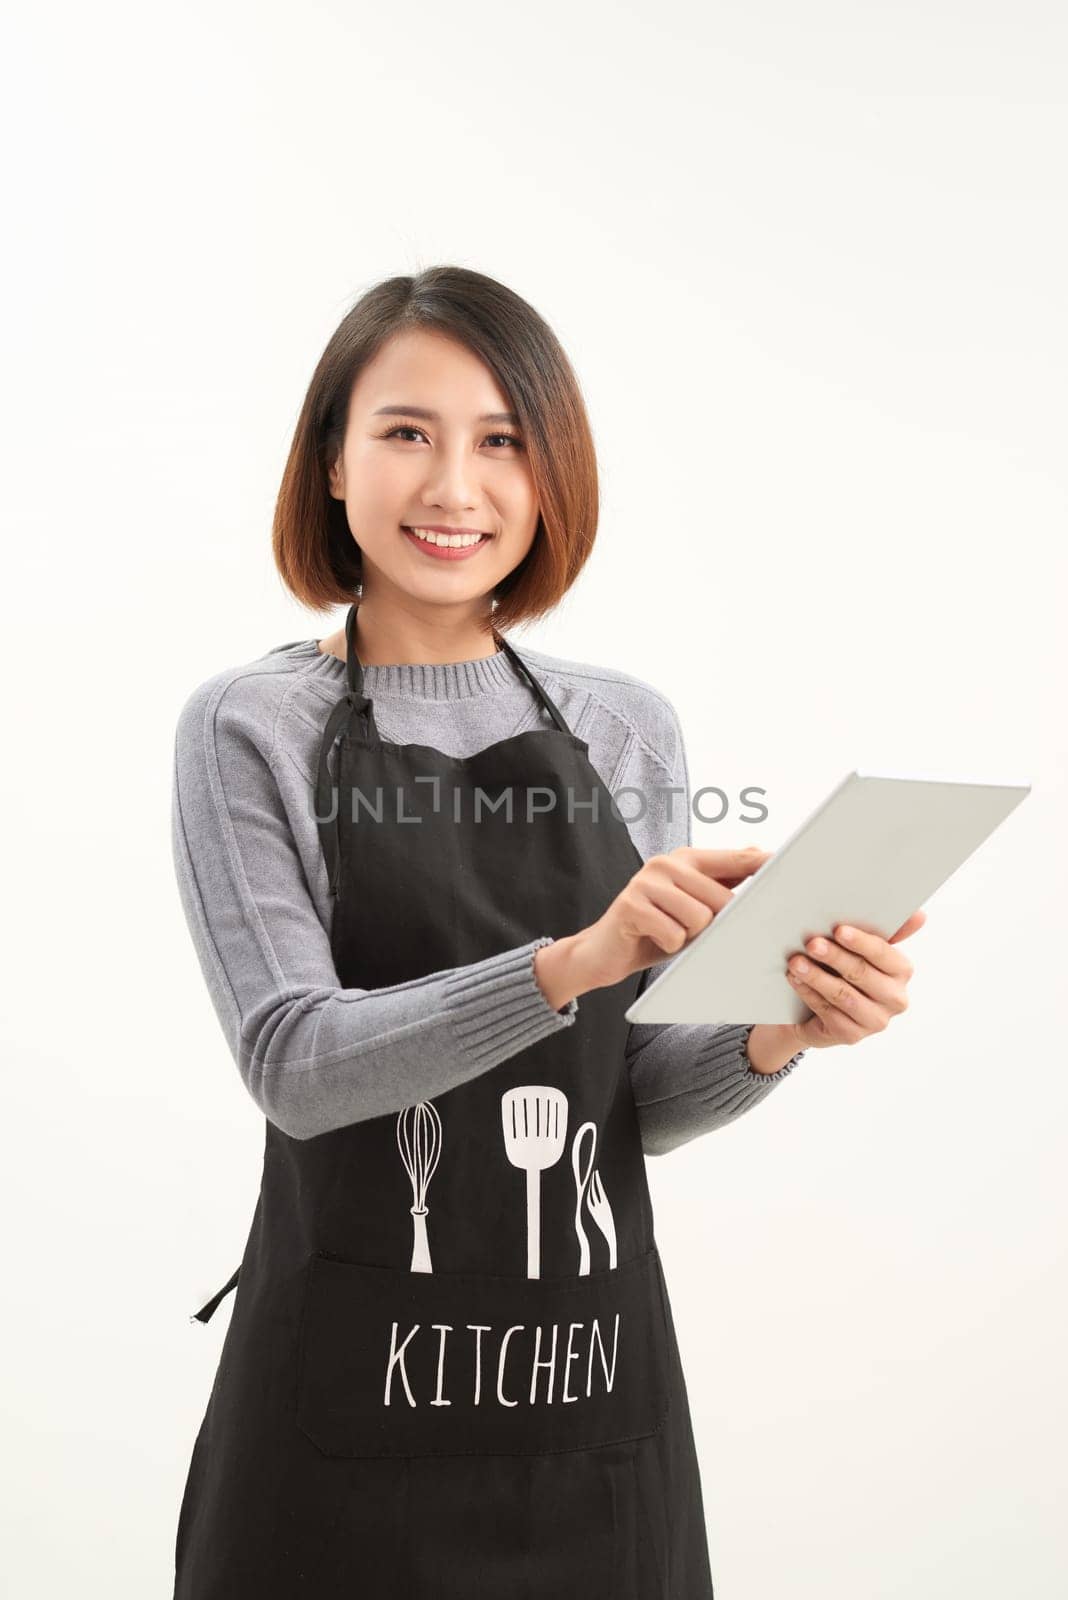 Successful hypermarket employee with black apron holding modern tablet isolated on white background with copyspace